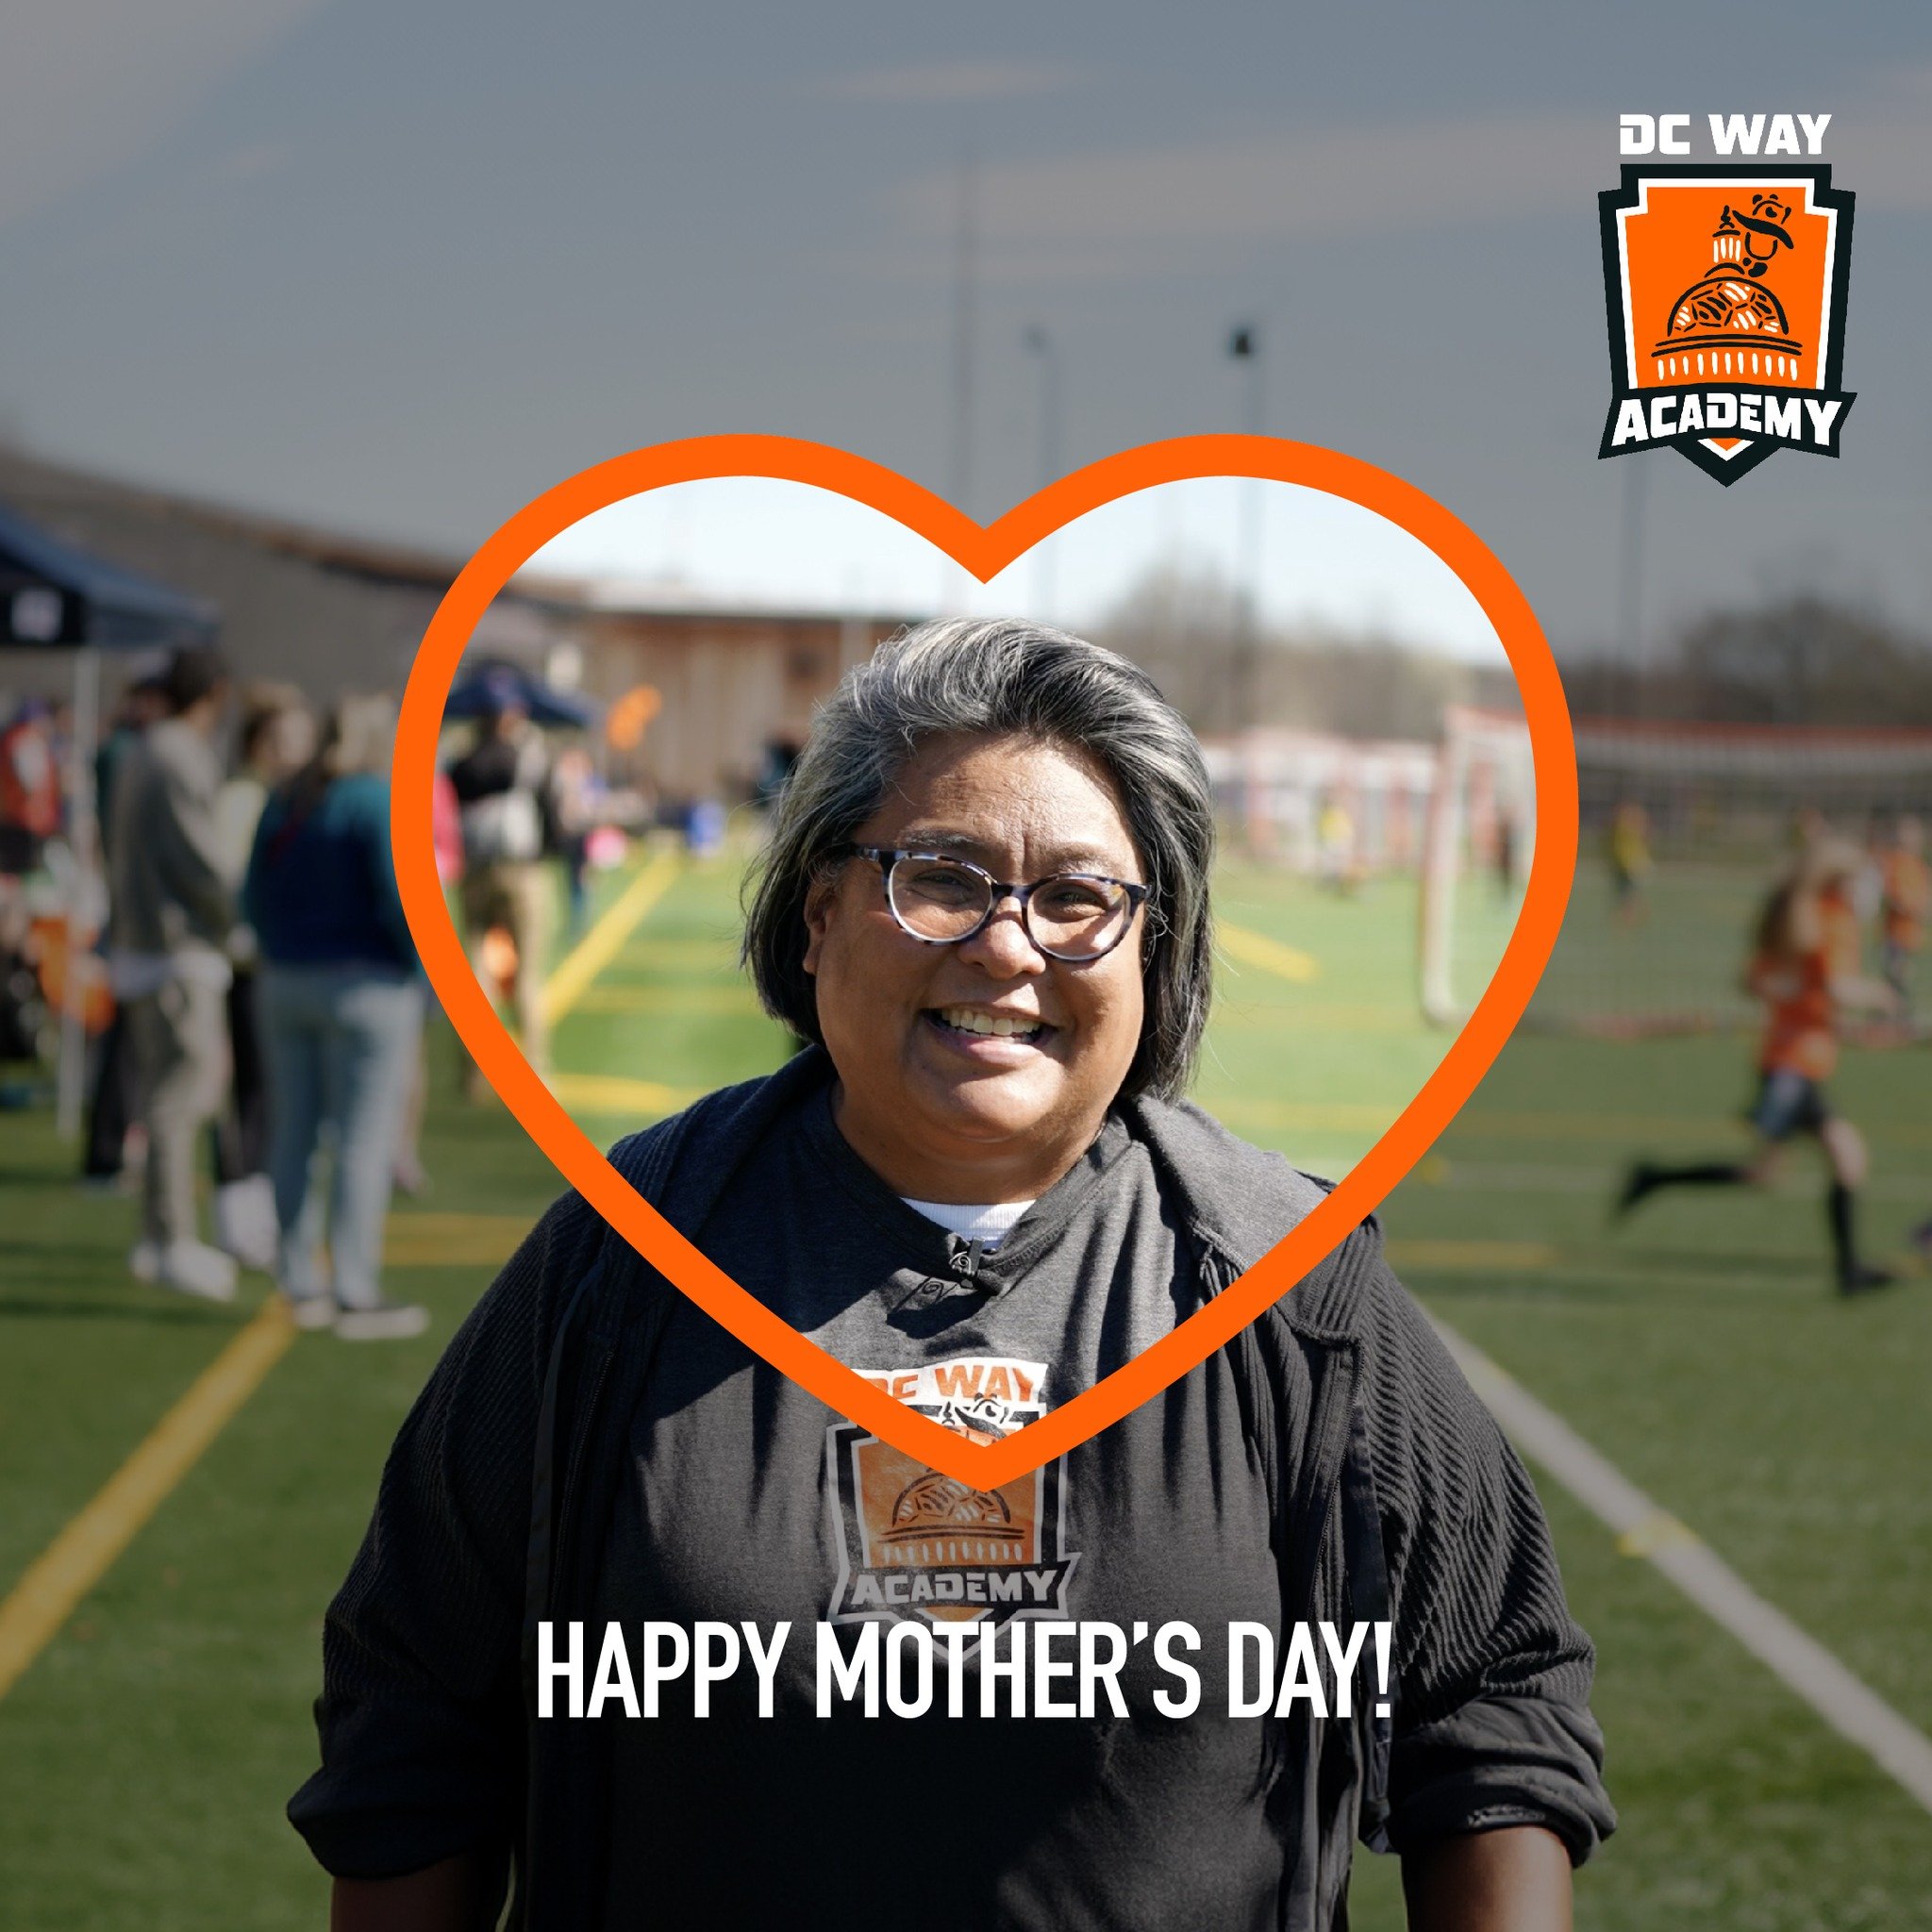 Wishing a Happy Mother's Day to all the amazing soccer moms out there! ⚽️💐 Your dedication, encouragement, and endless cheering from the sidelines mean everything to us. We're grateful for your unwavering support and love. Enjoy your special day! 🌟